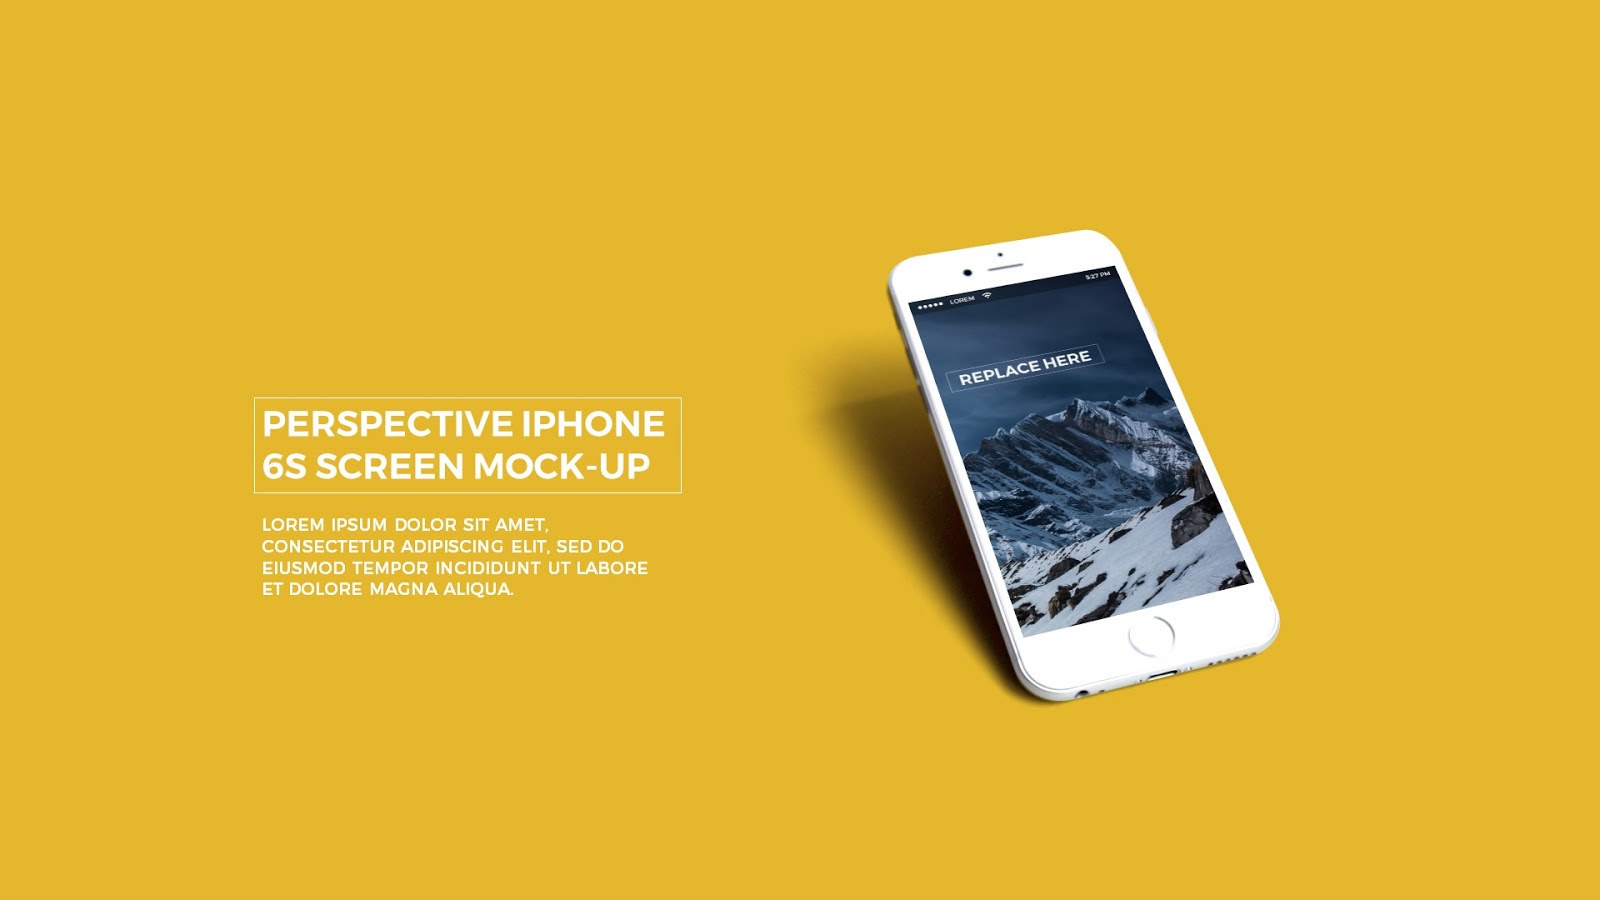 Free Powerpoint Template With Realistic Iphone 6s App - Presentation App Mockup - HD Wallpaper 